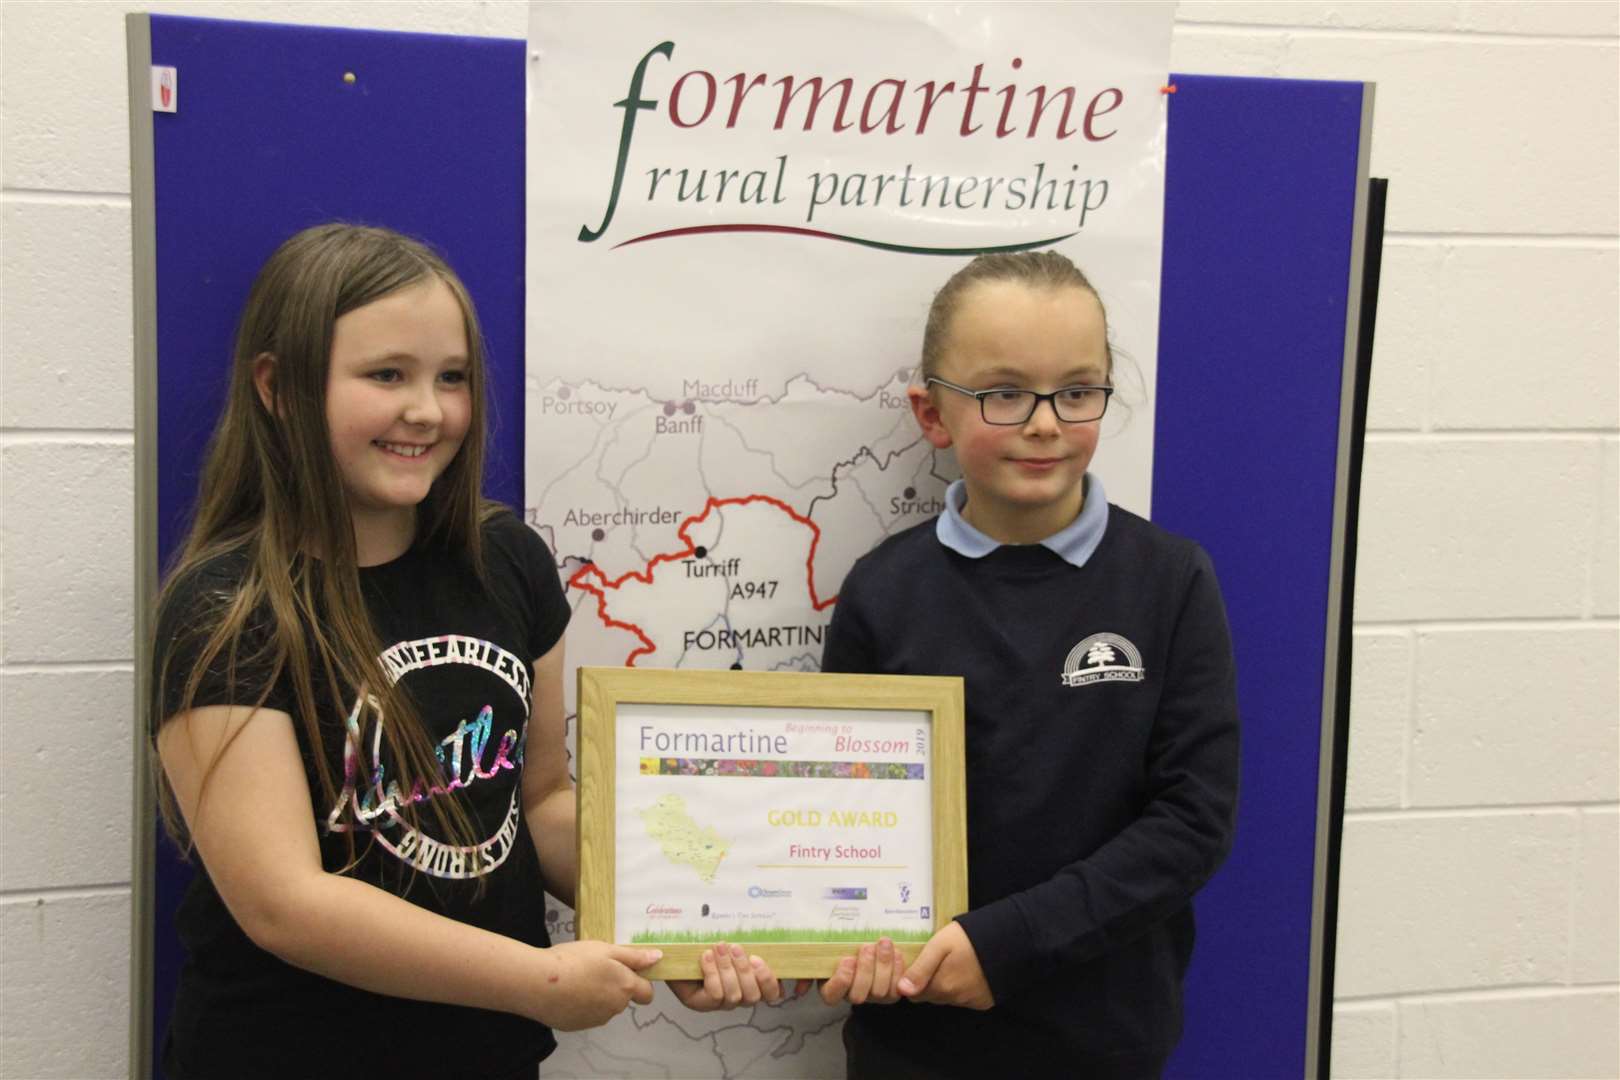 It was gold for Fintry Primary School.